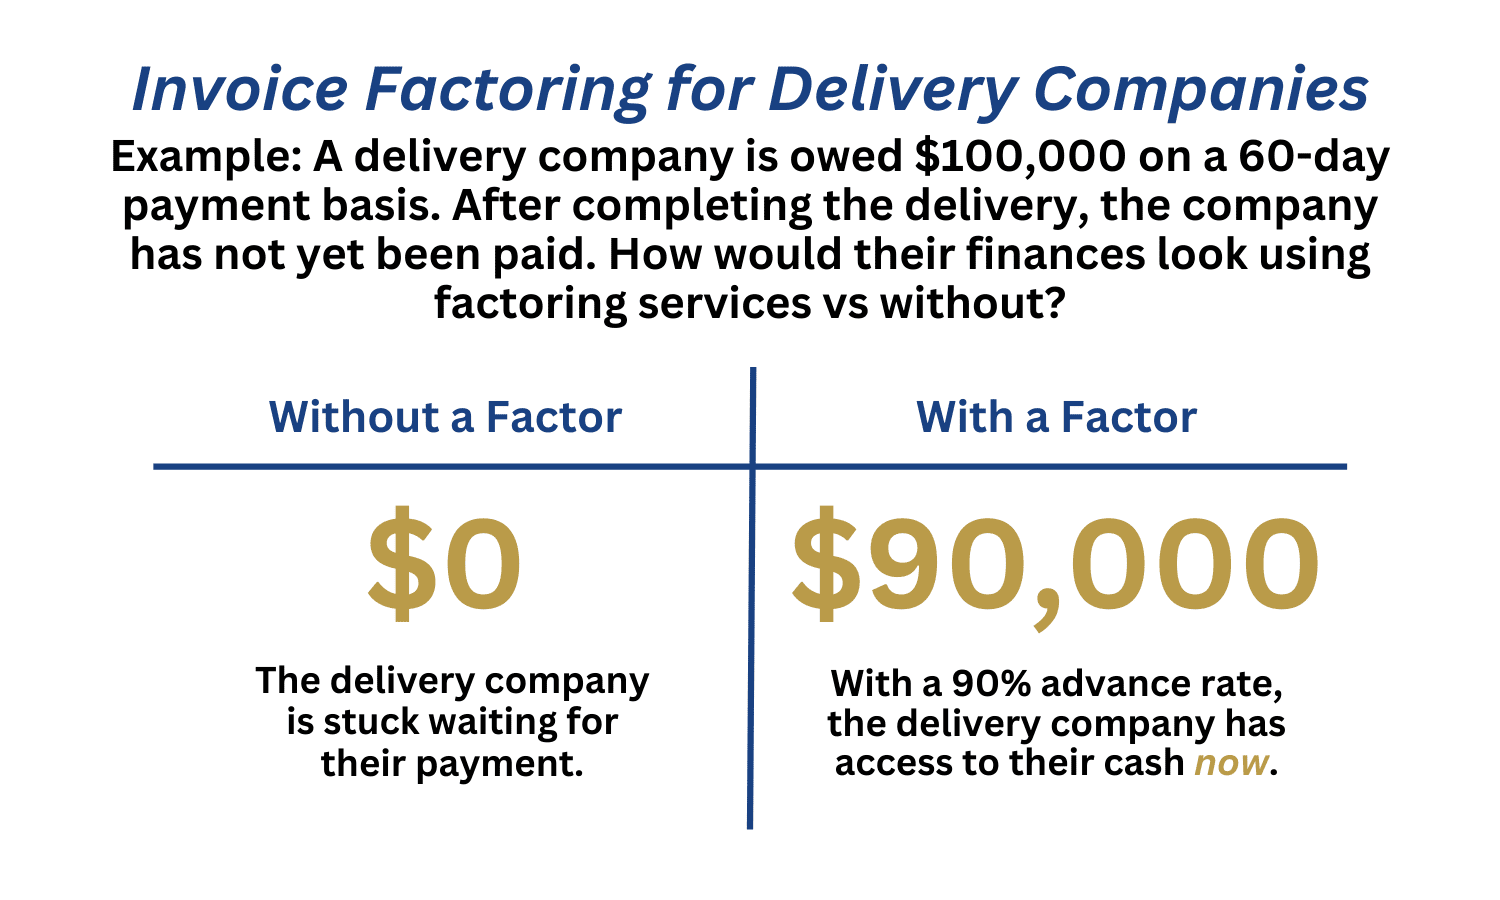 Invoice Factoring for Delivery Companies